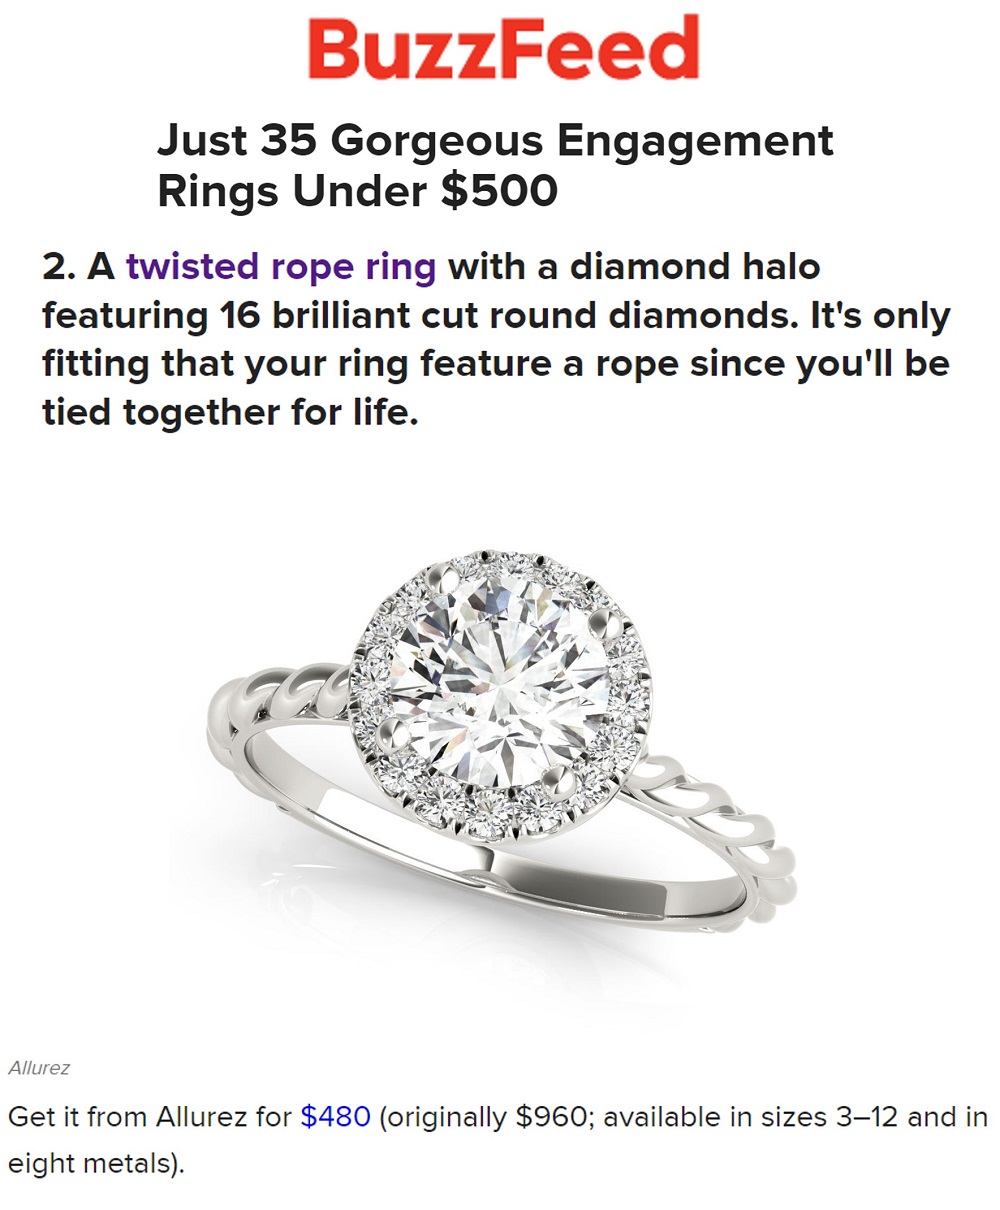 Just 35 Gorgeous Engagement Rings Under $500